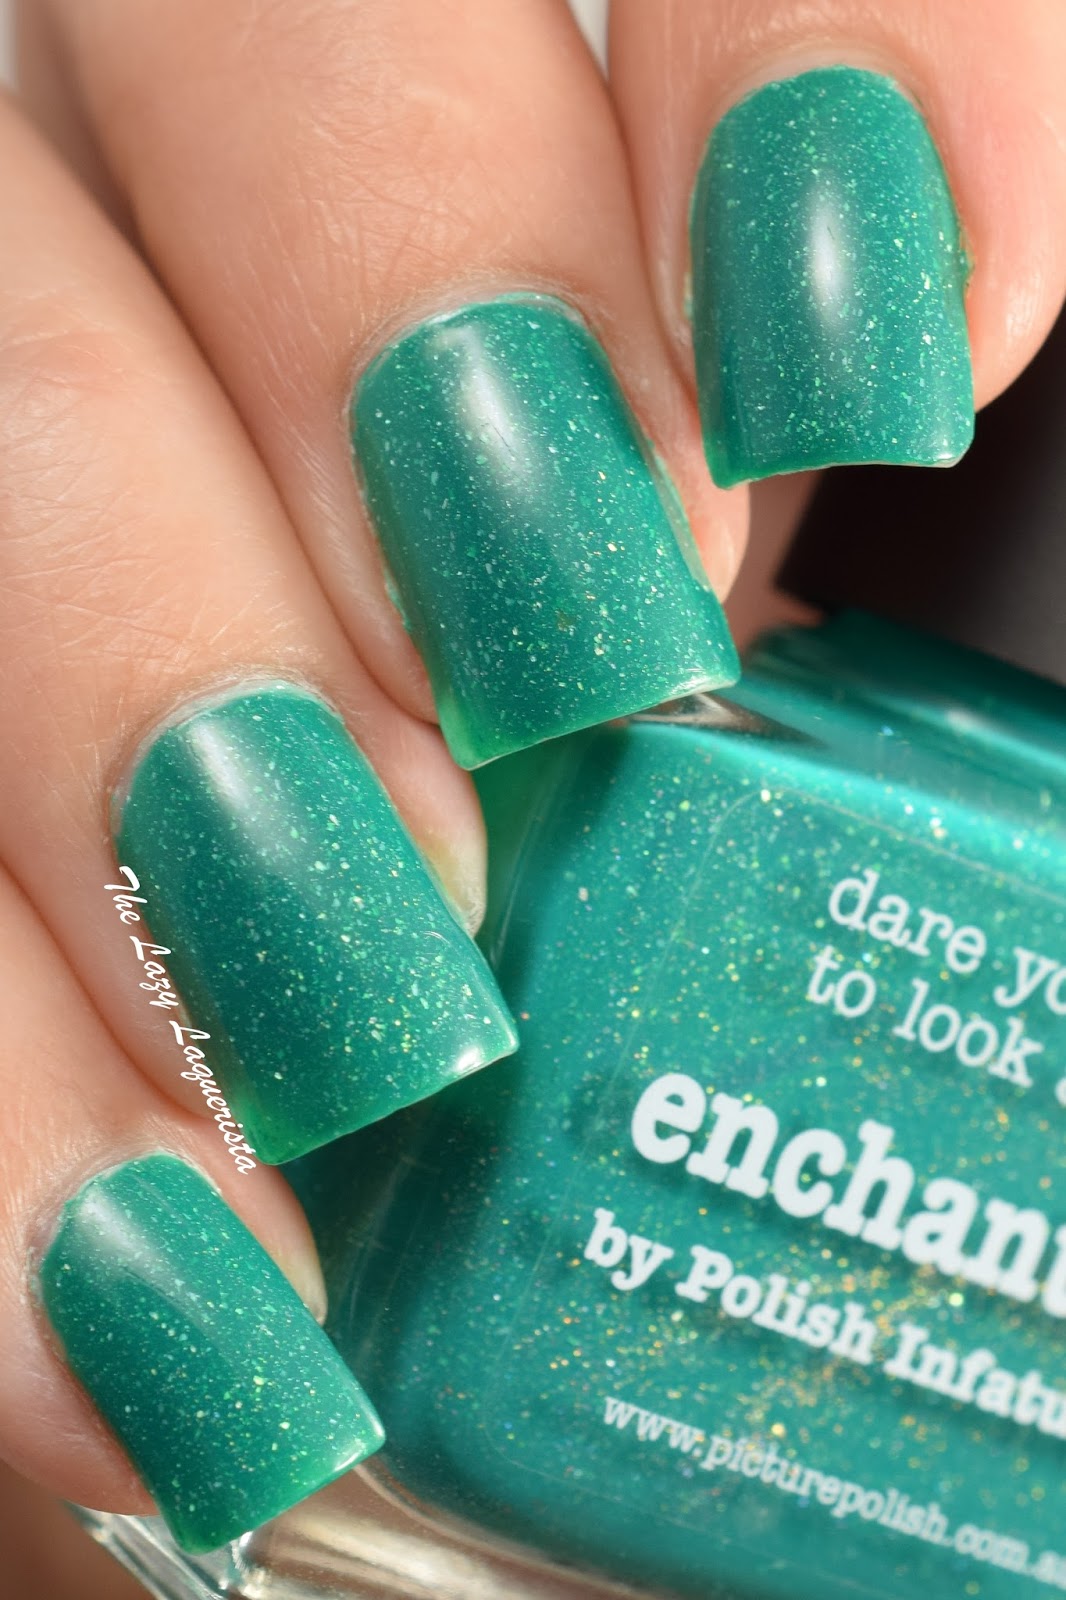 Picture Polish Enchanting Swatch